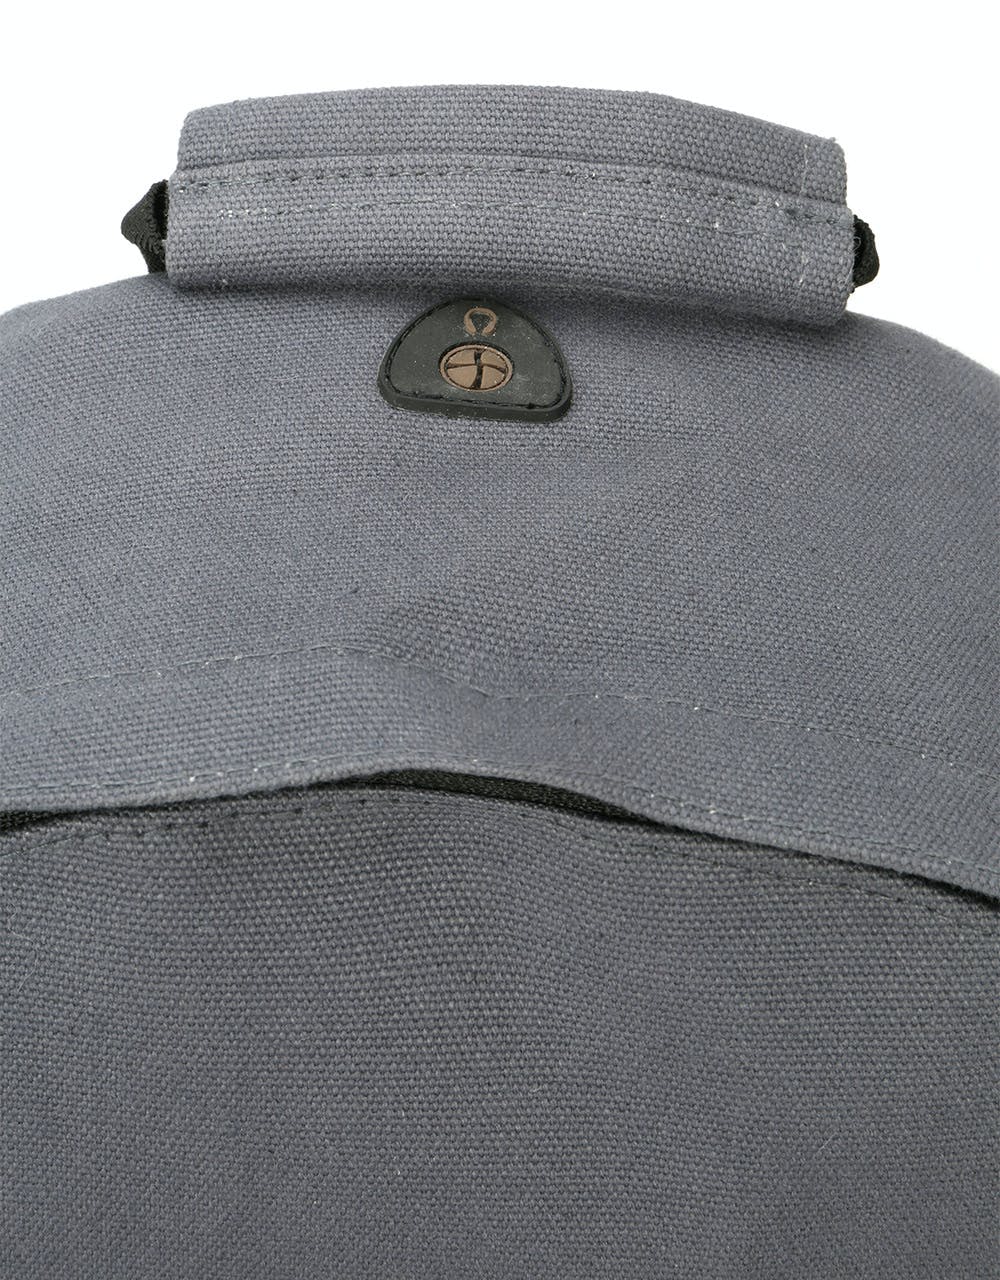 Mi-Pac Canvas Backpack - Charcoal